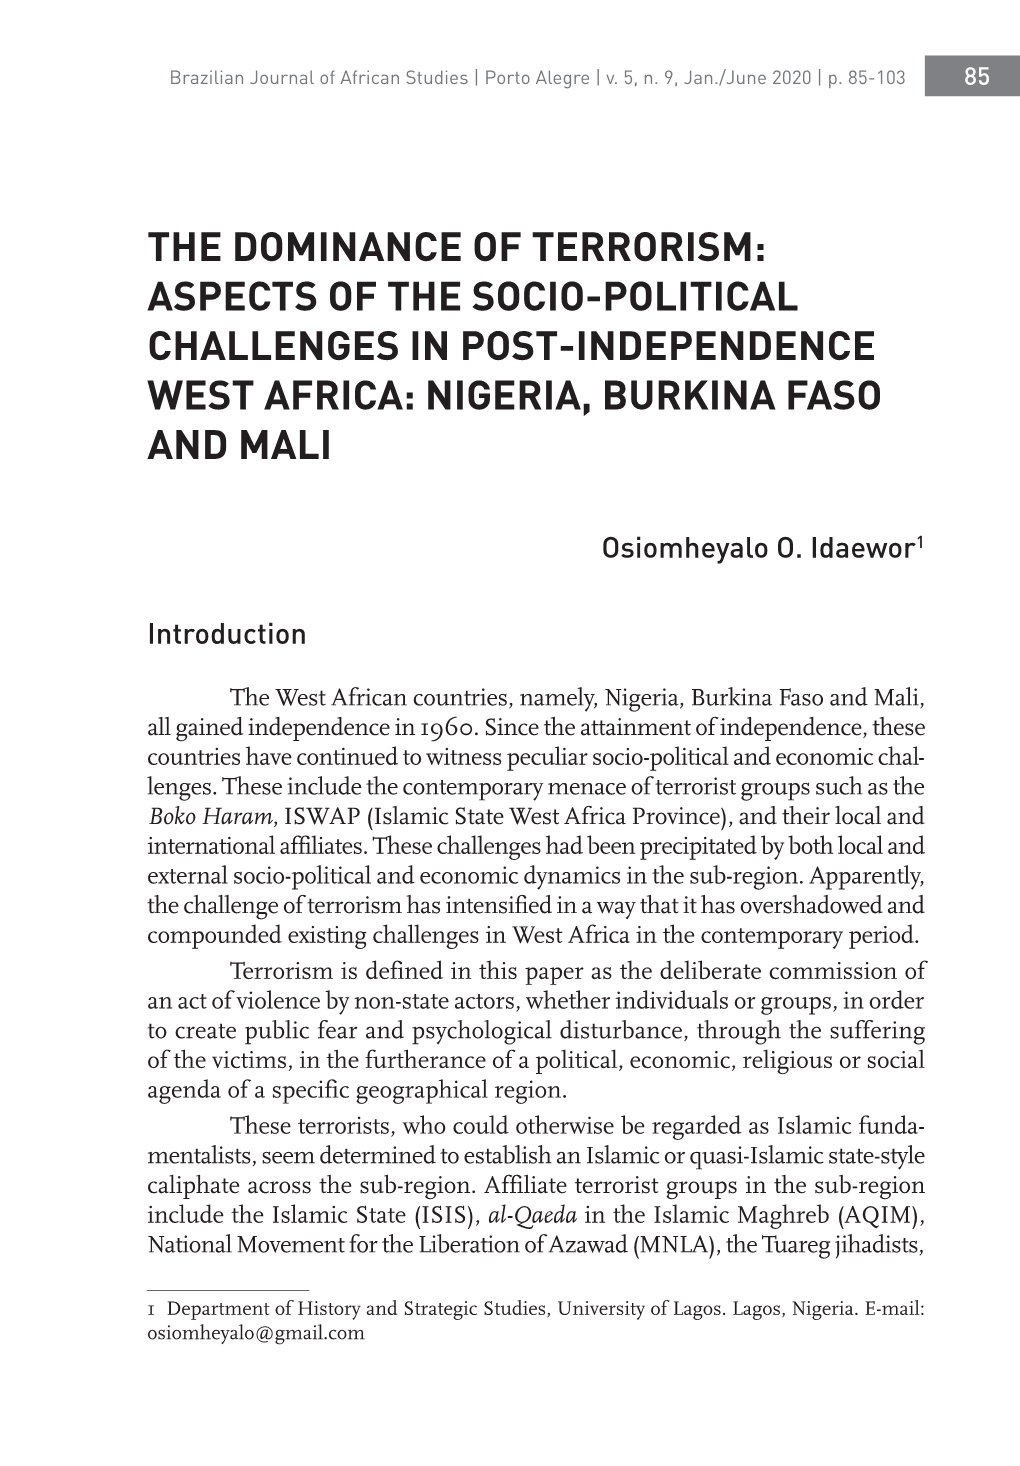 The Dominance of Terrorism: Aspects of the Socio-Political Challenges in Post-Independence West Africa: Nigeria, Burkina Faso and Mali